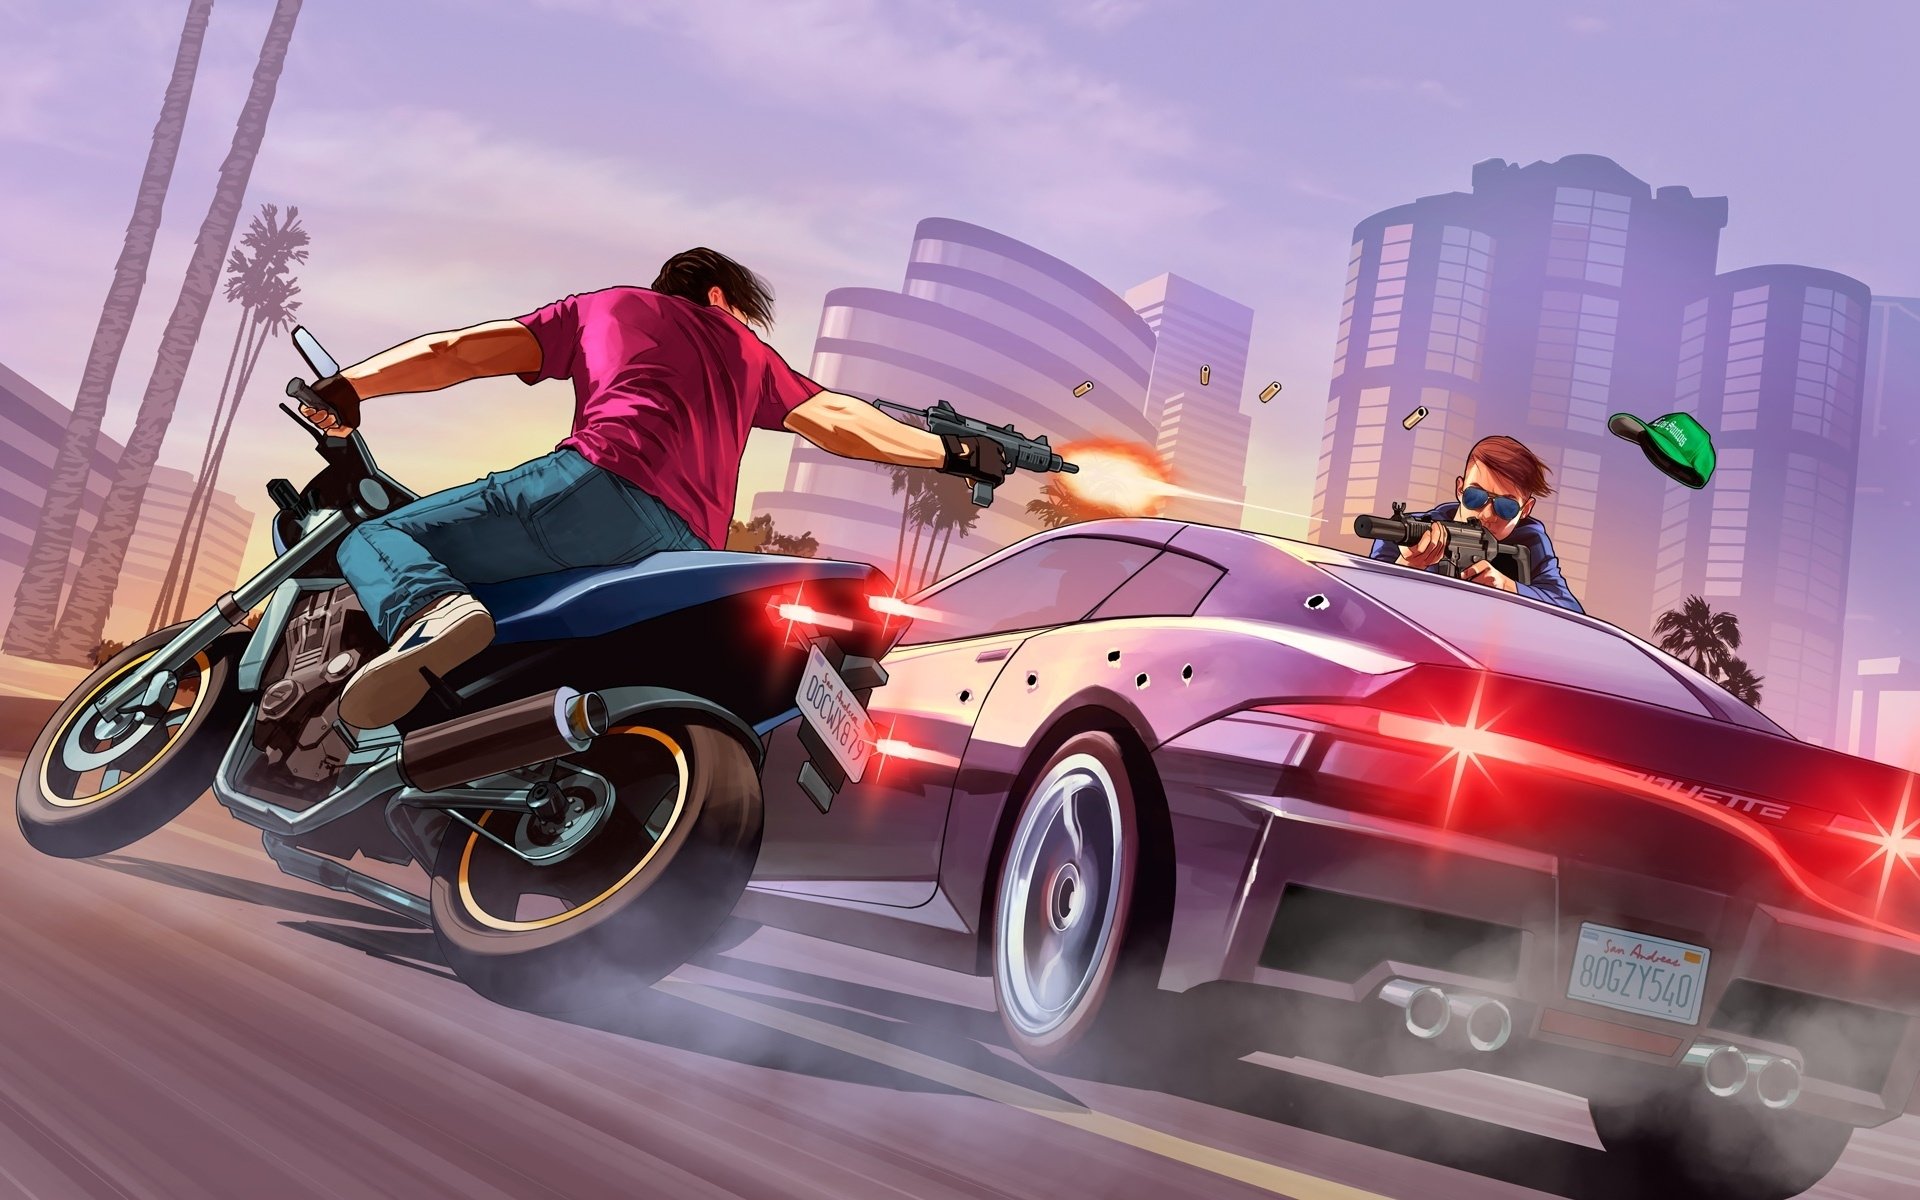 GTA 6 is set to revolutionize gaming if we believe this new leak